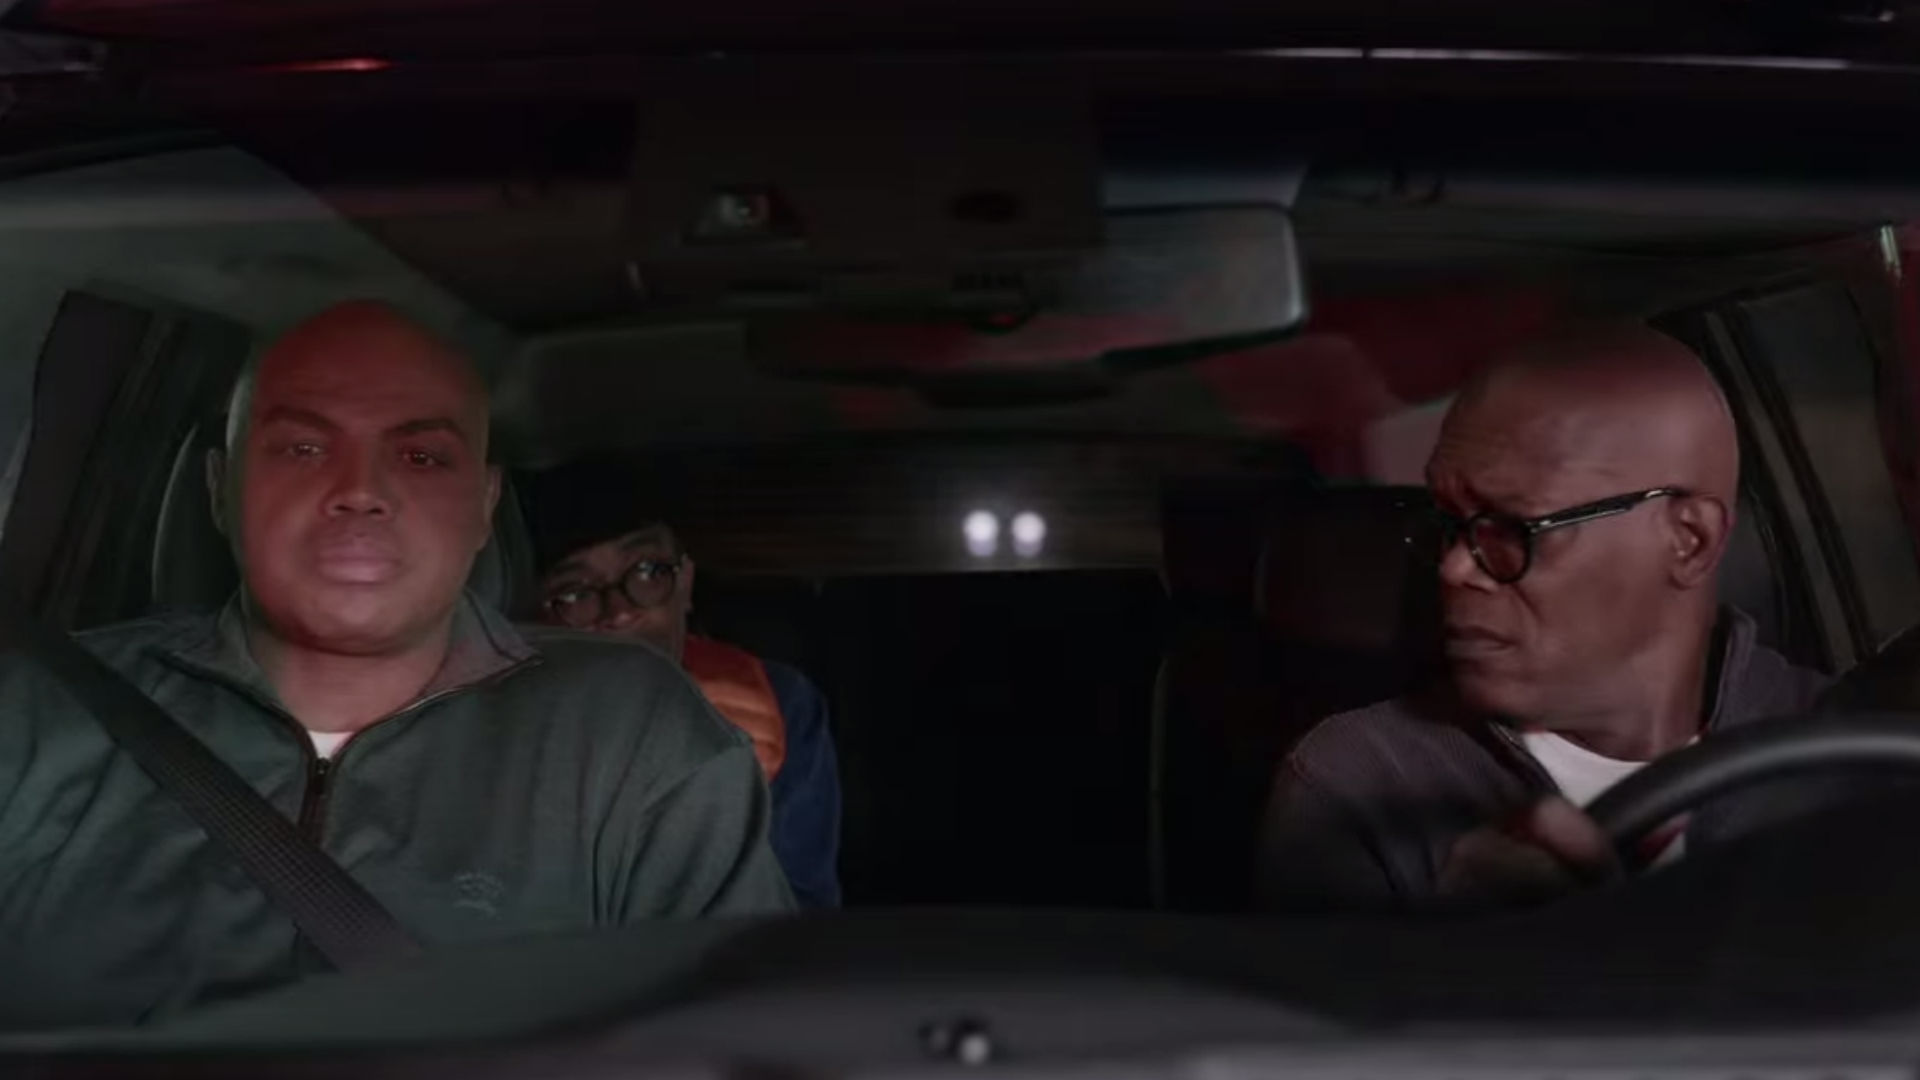 Charles Barkley, Samuel L. Jackson, and Spike Lee star in Final Four commercials ...